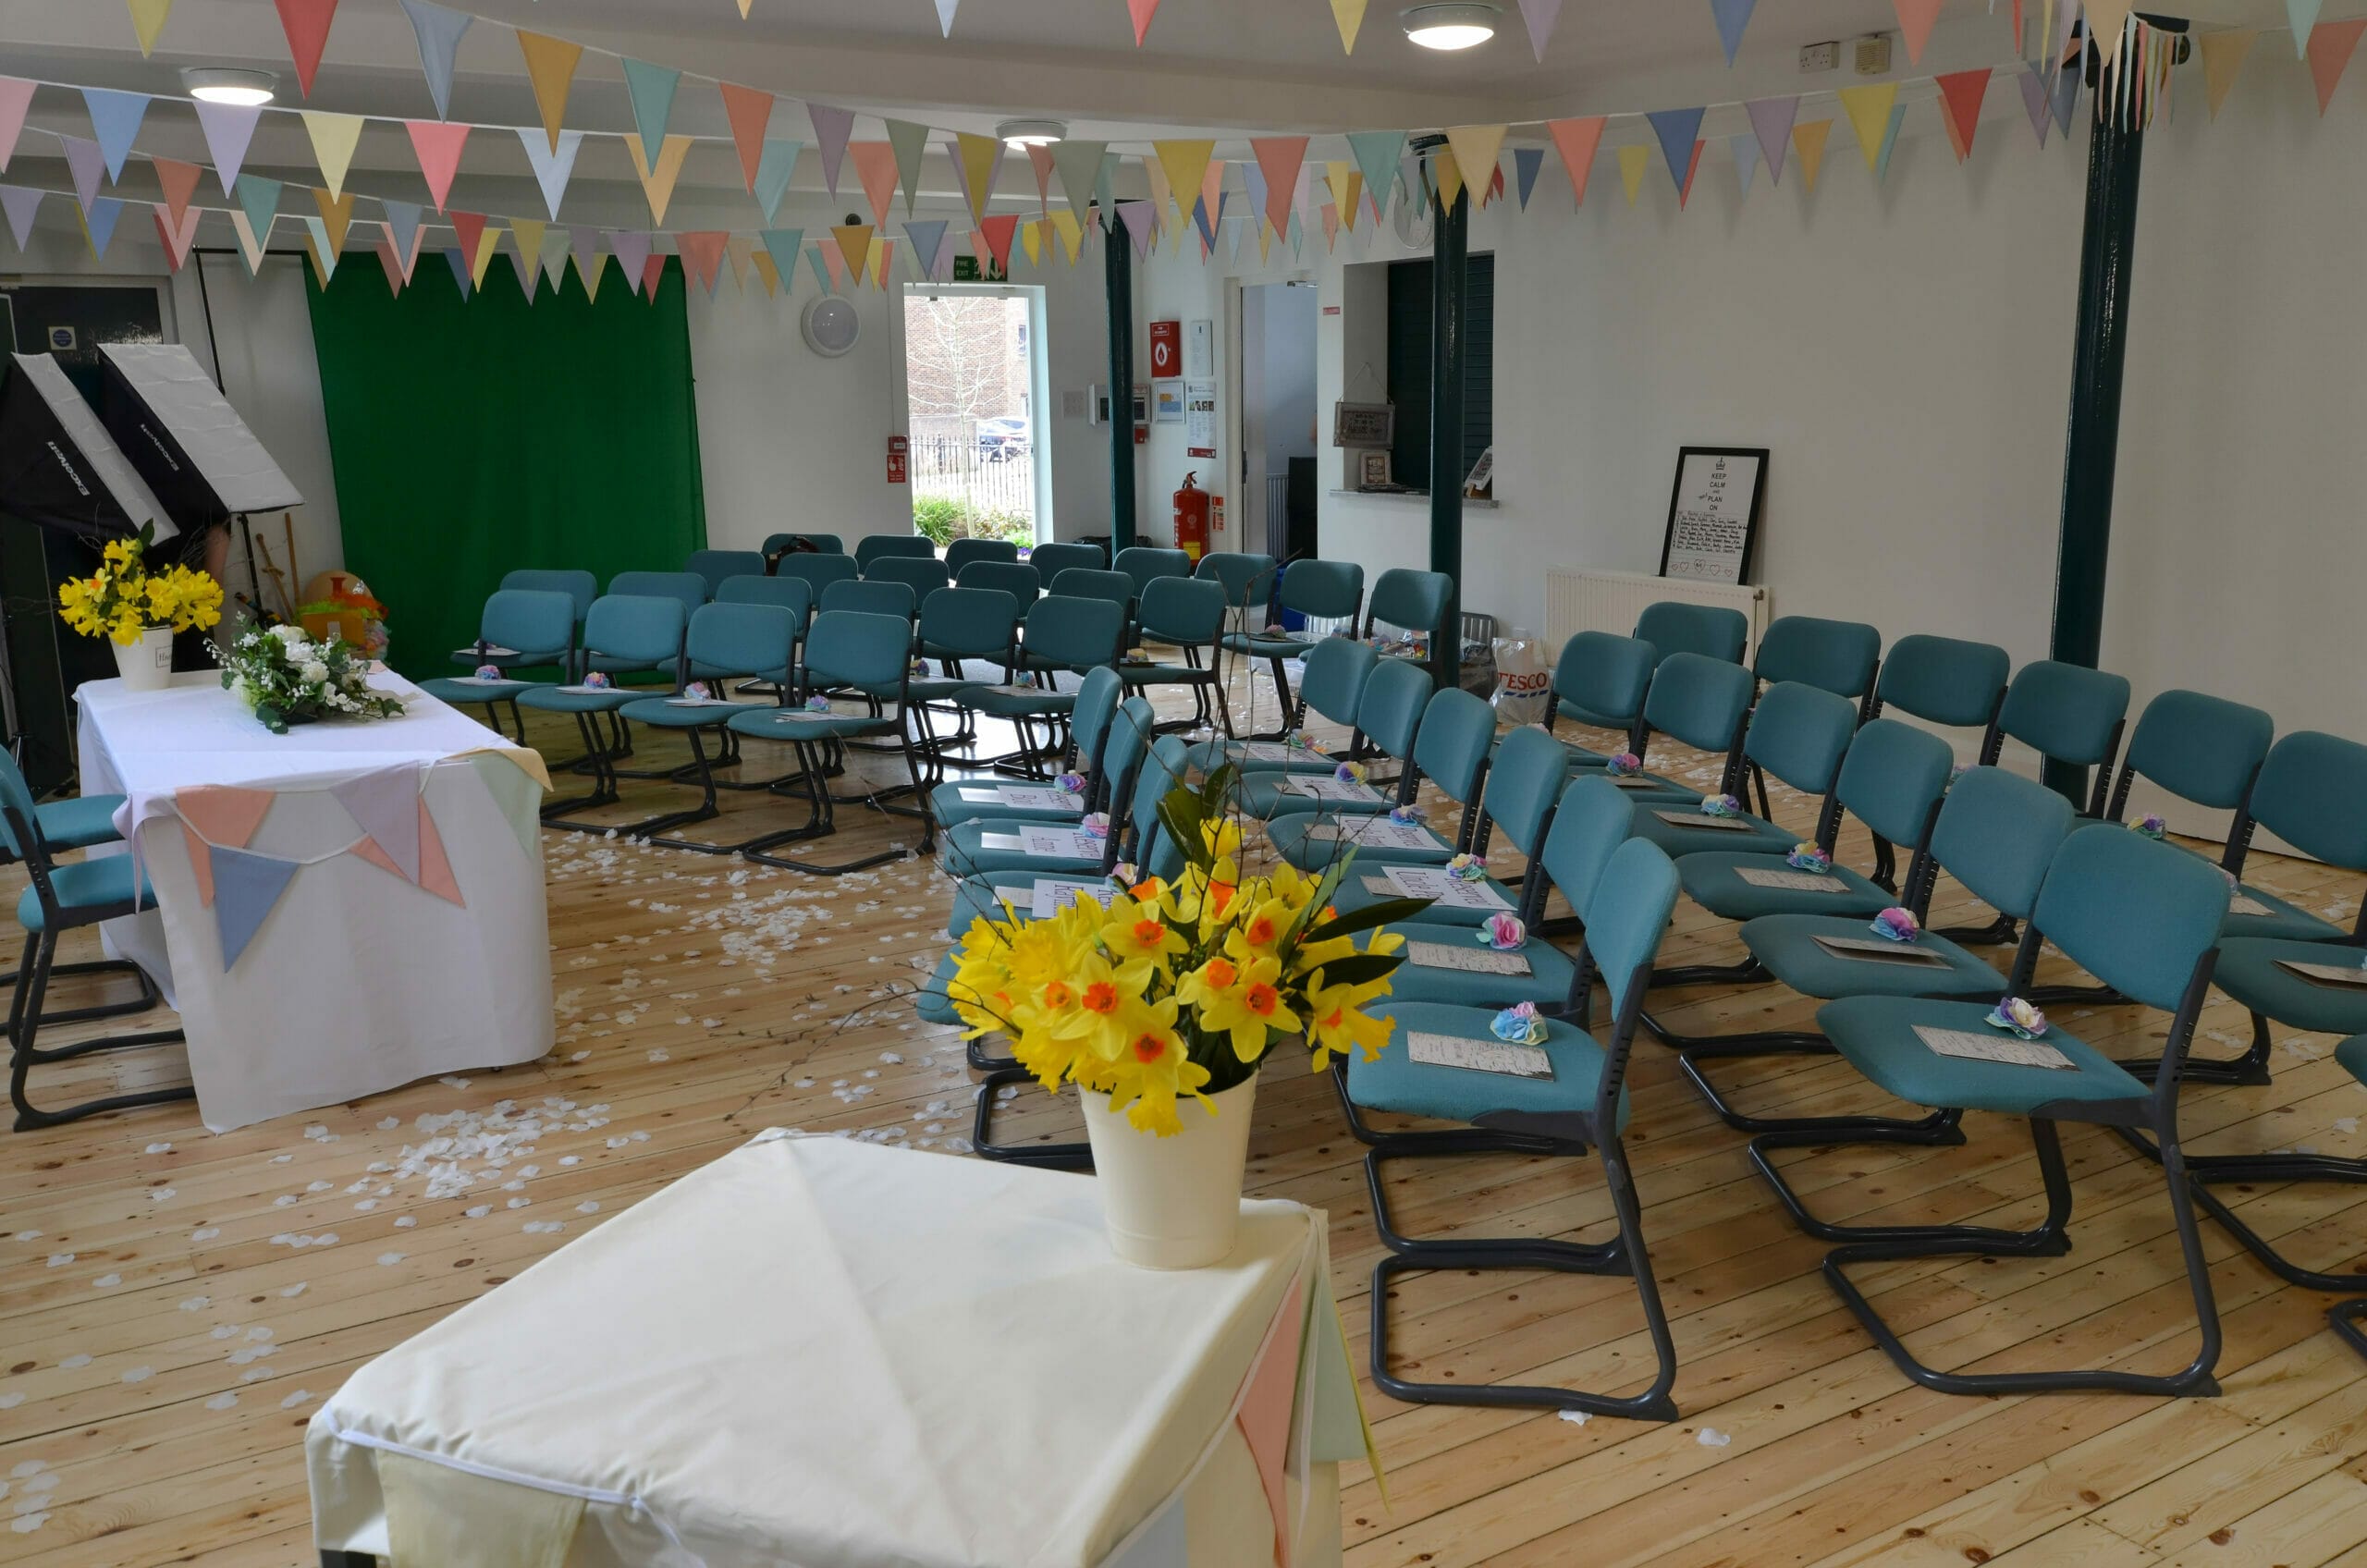 Photo shows a room layout with chairs and bunting